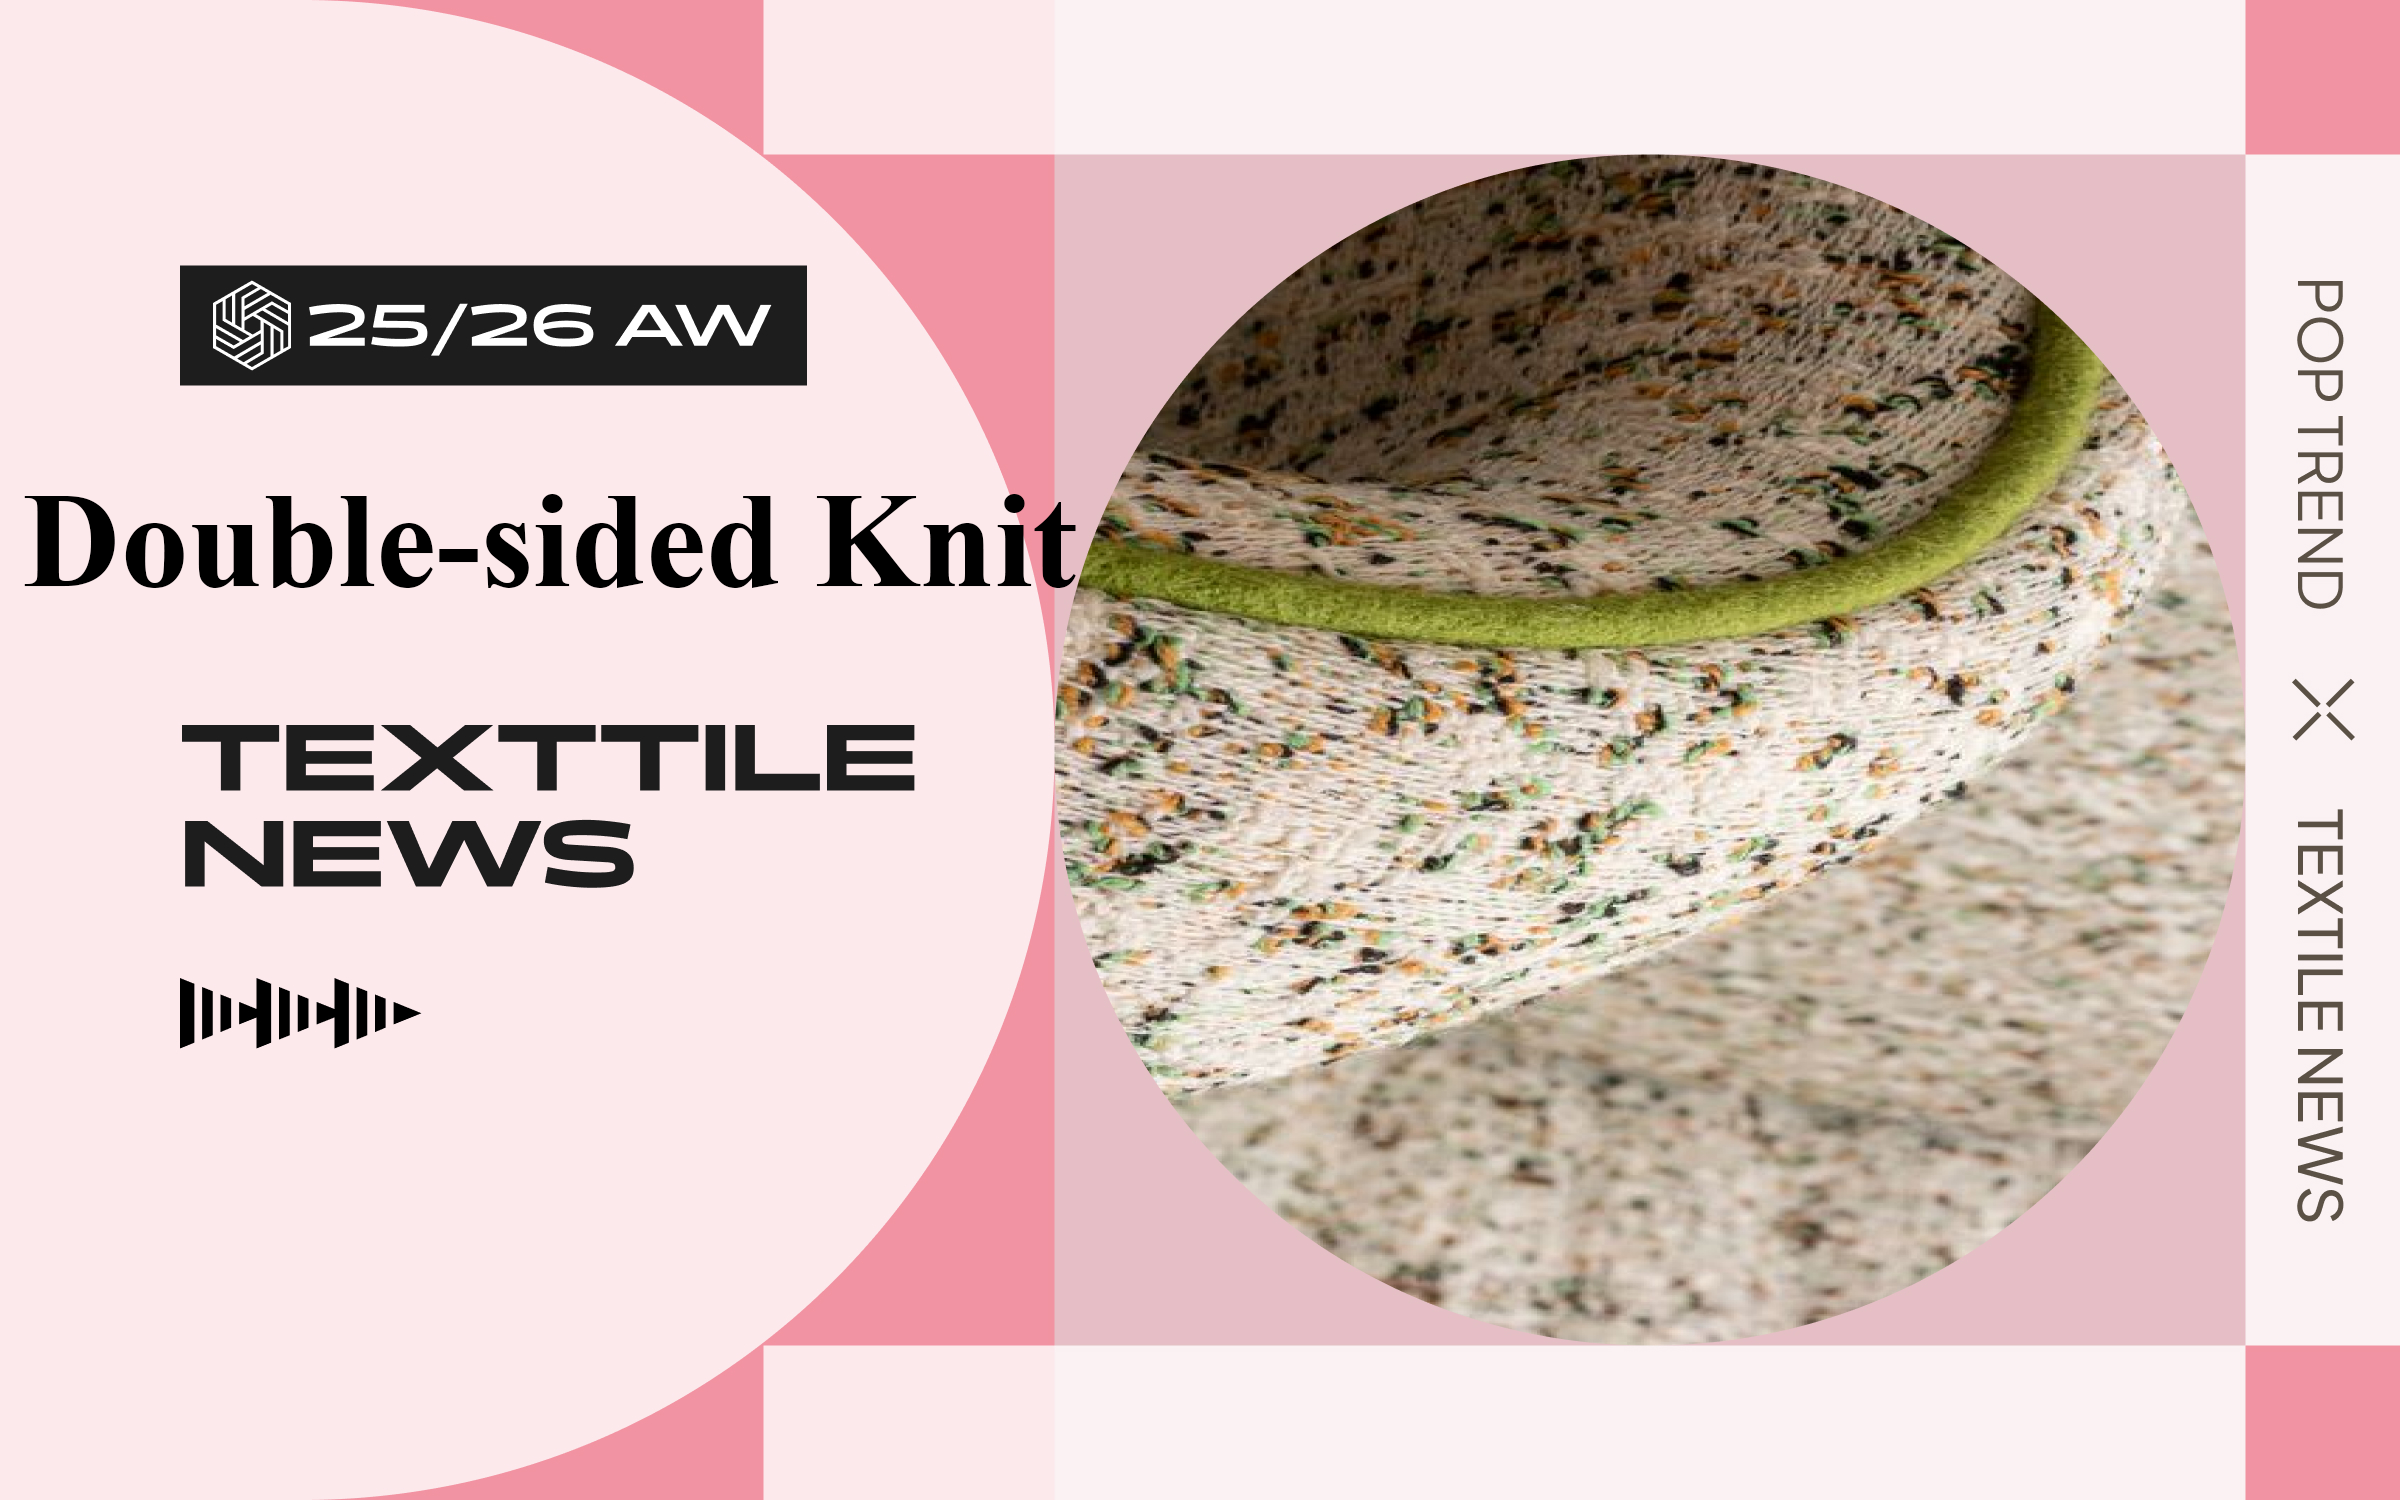 The Feature Introduction of Double-sided Knit